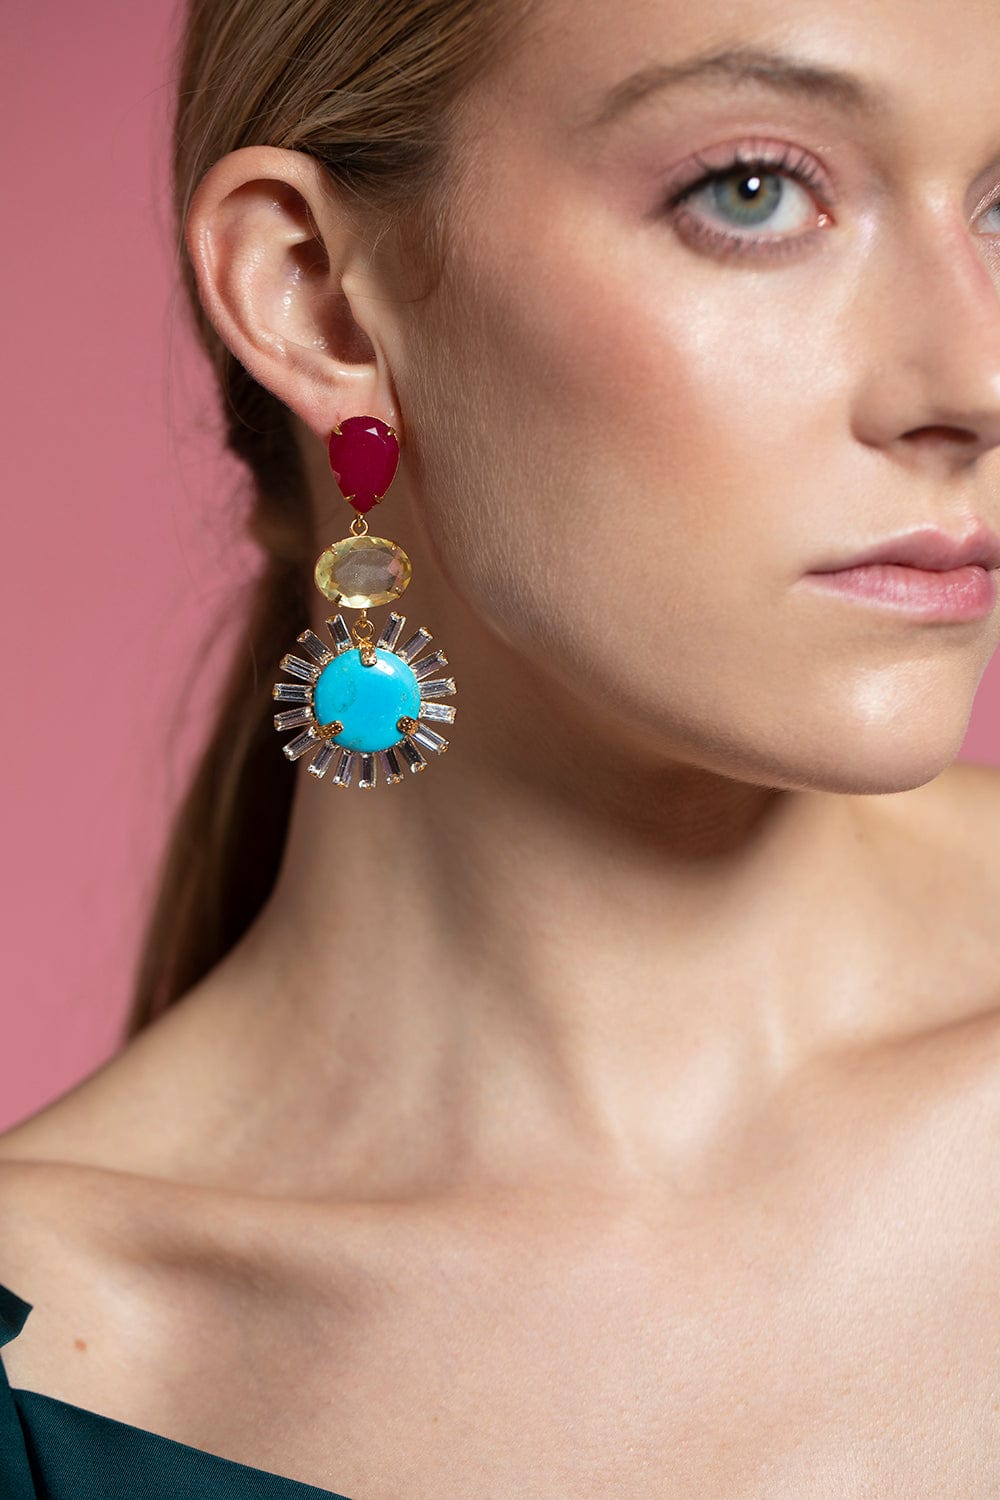 BOUNKIT JEWELRY-Turquoise, Lemon Quartz and Ruby Statement Earrings-GOLD